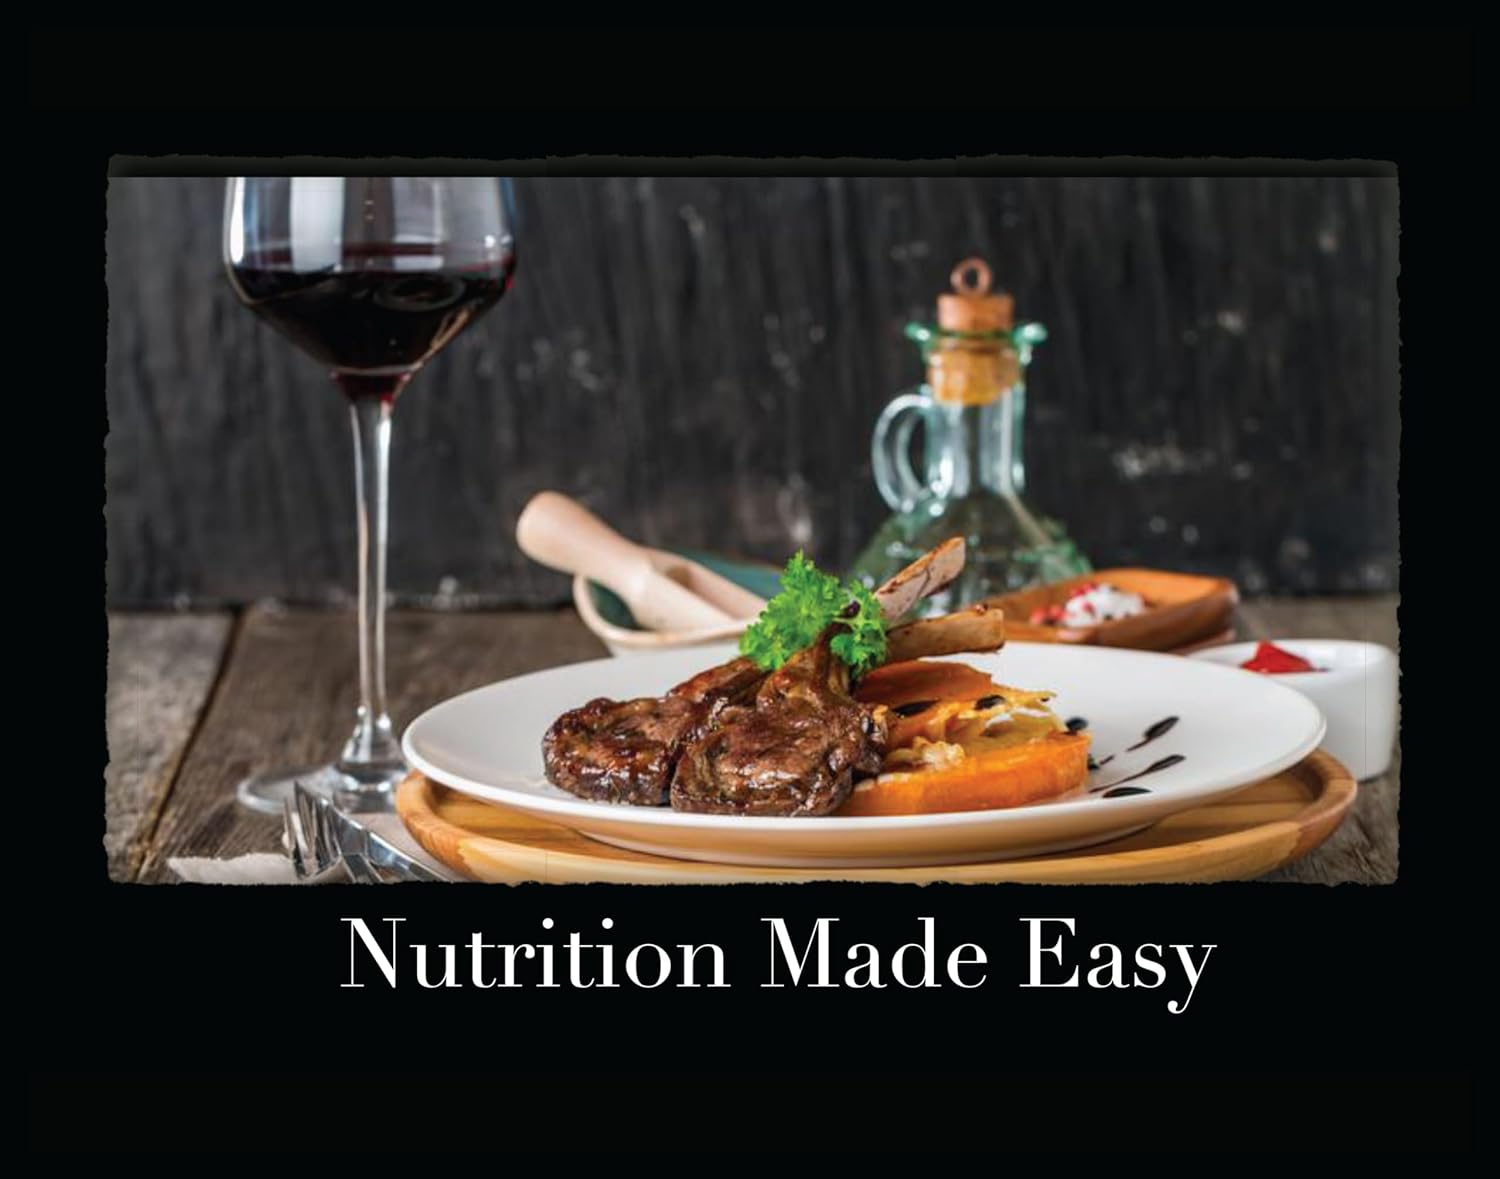 "Nutrition Made Easy" by Lora Collins Tustison Simplifies Nutrition With Clear and Tangible Information for All